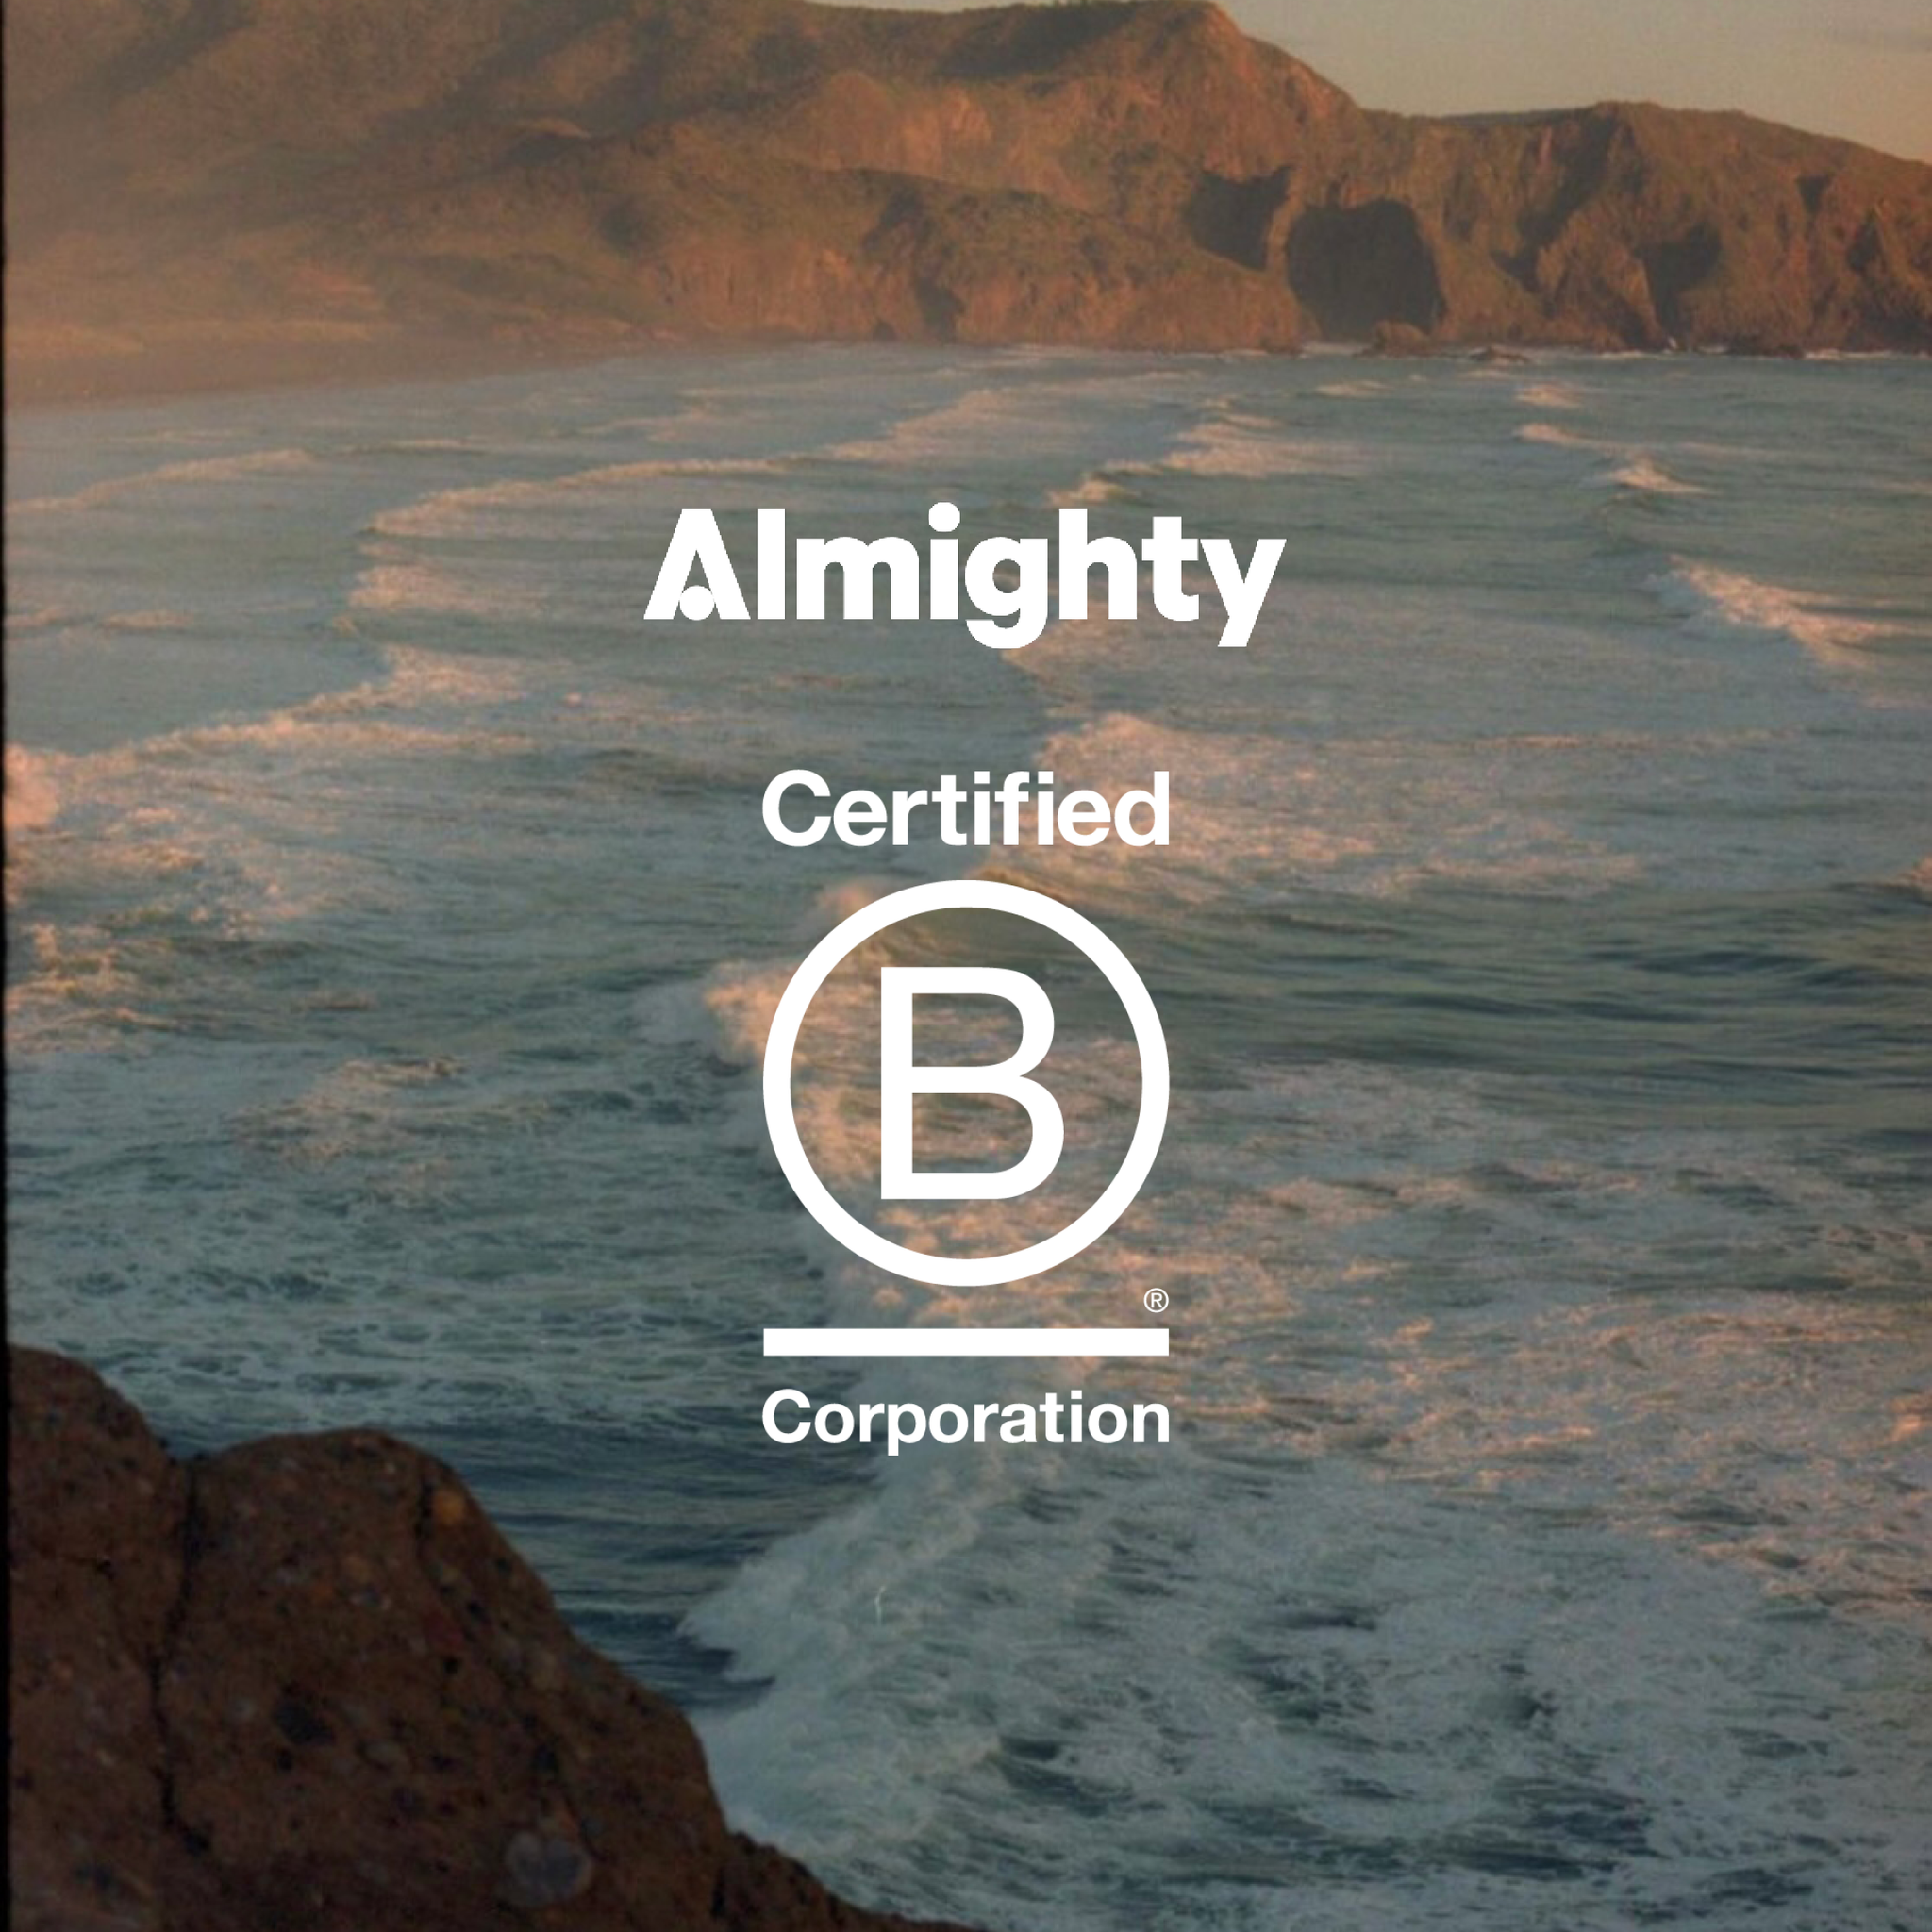 Almighty is now a B Corporation